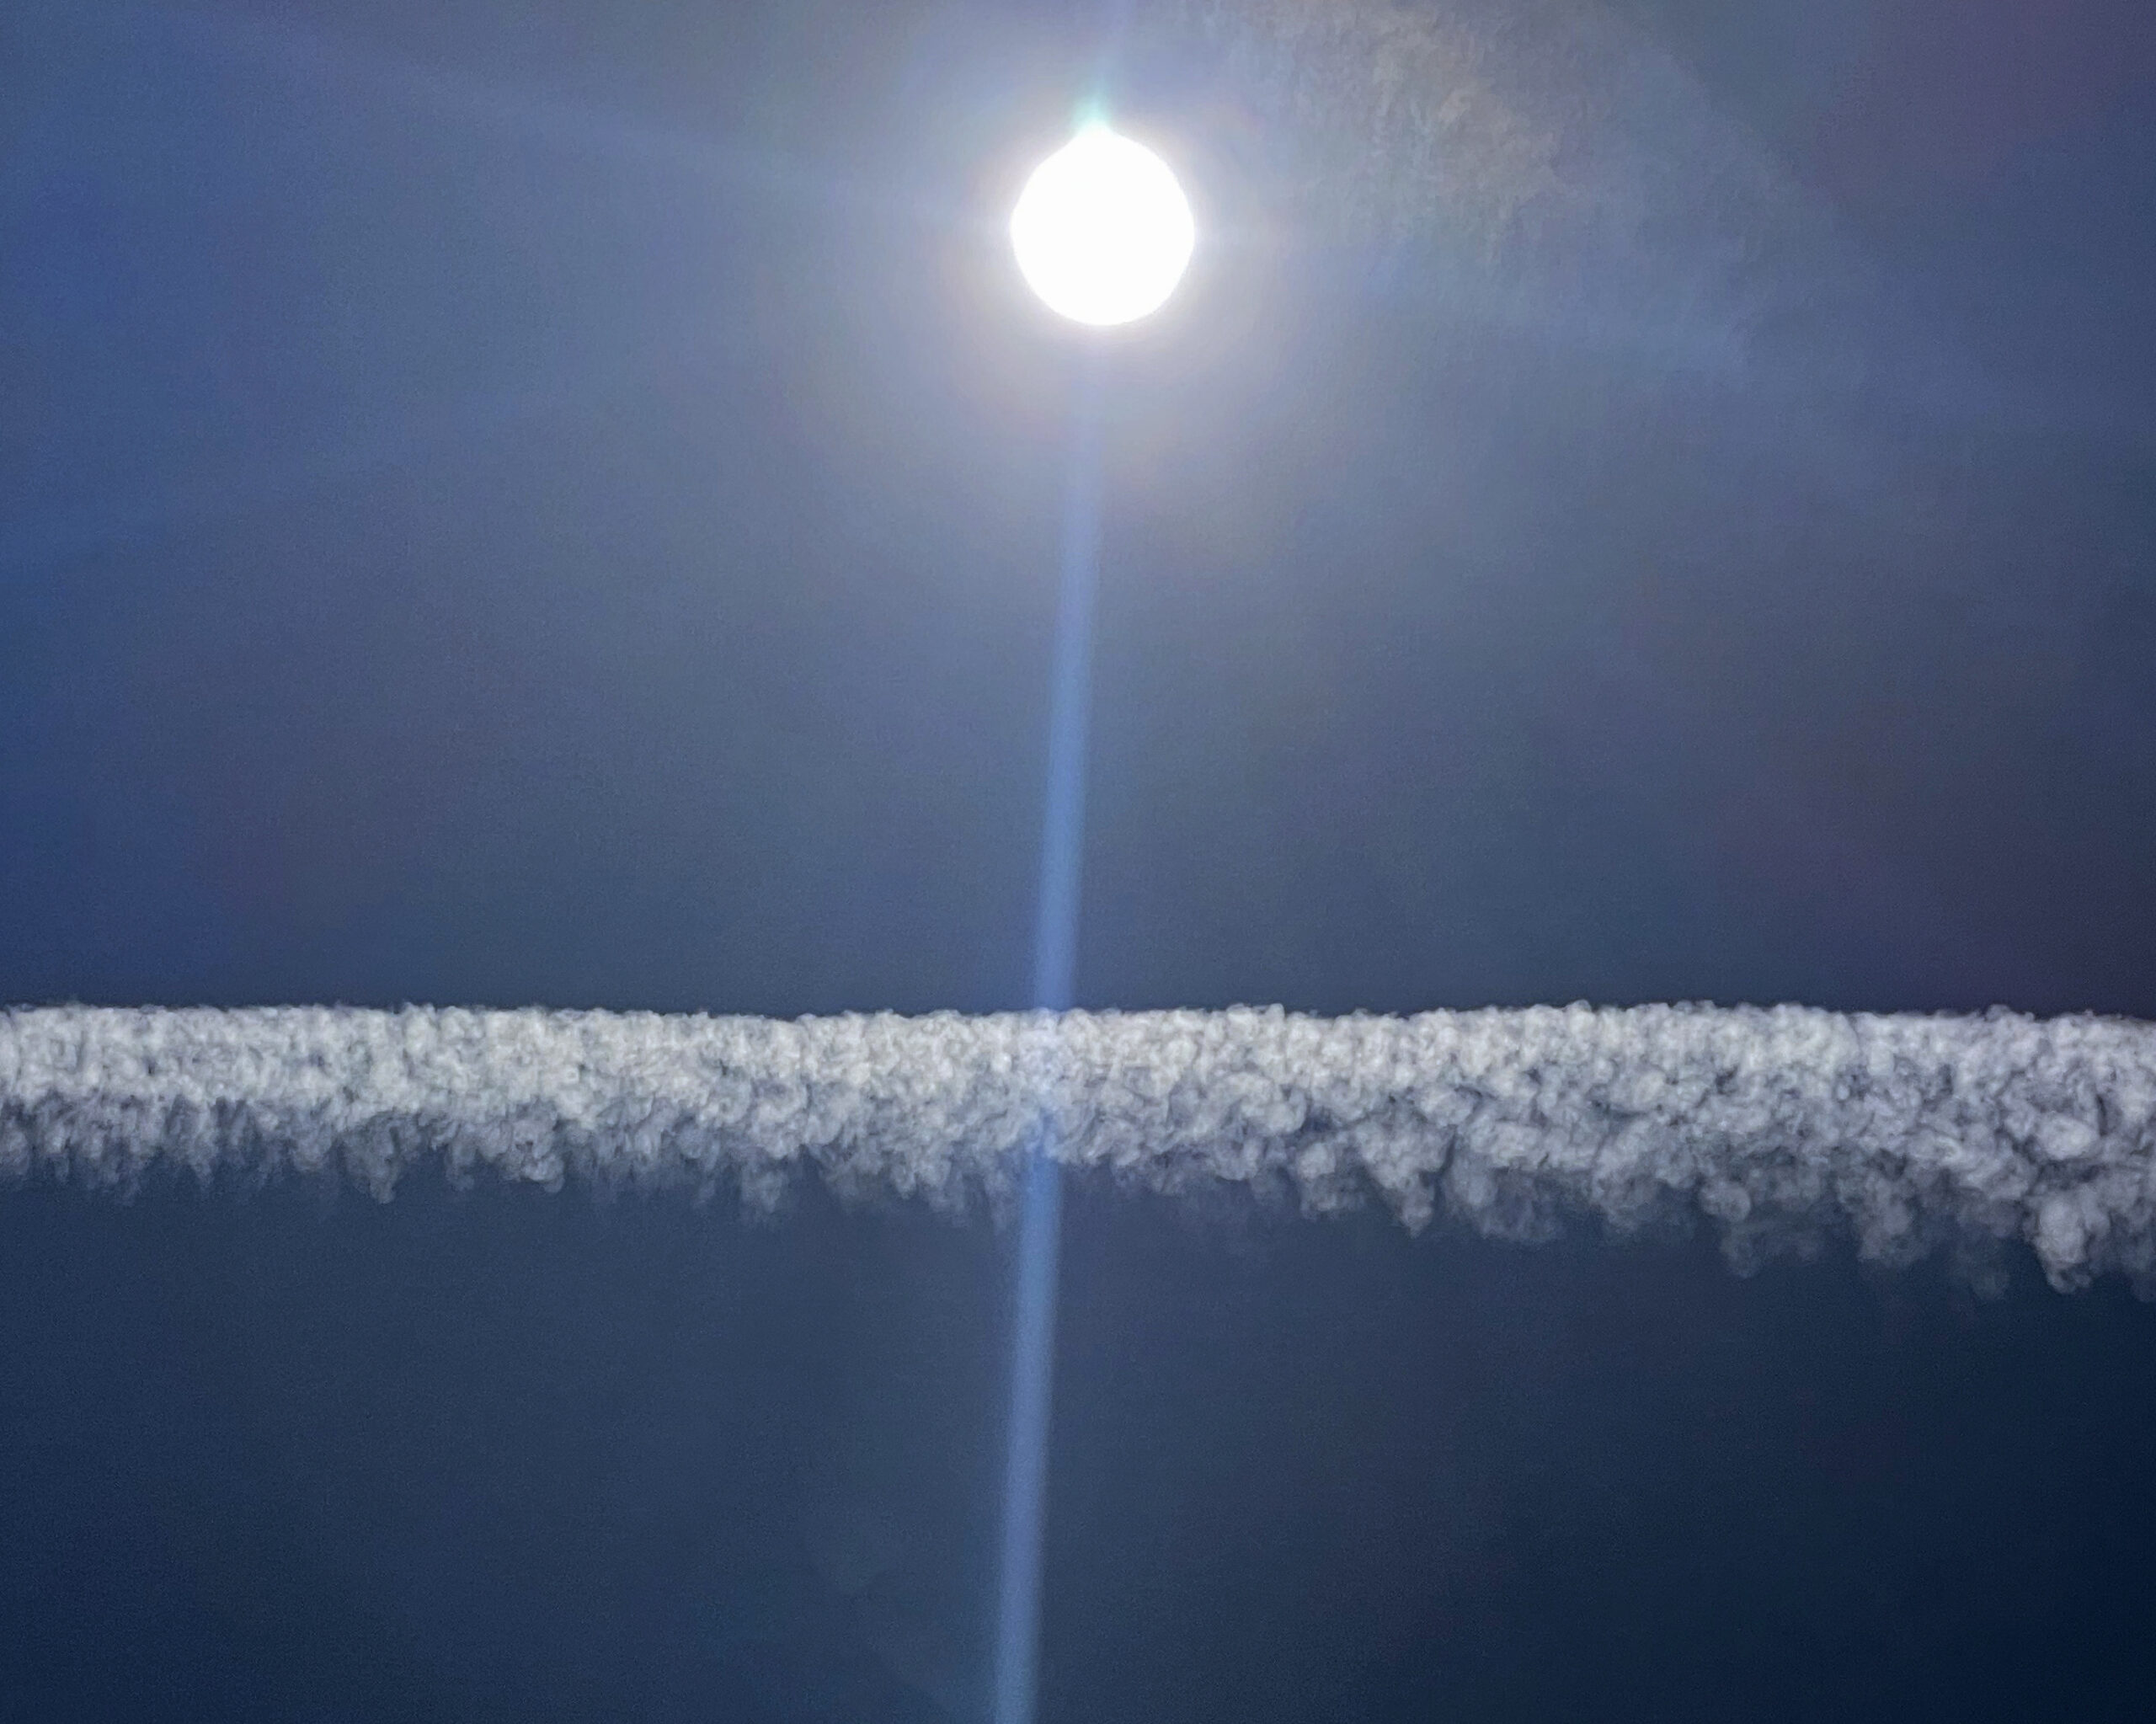 Image of the sun flaring light over an airplane contrail.